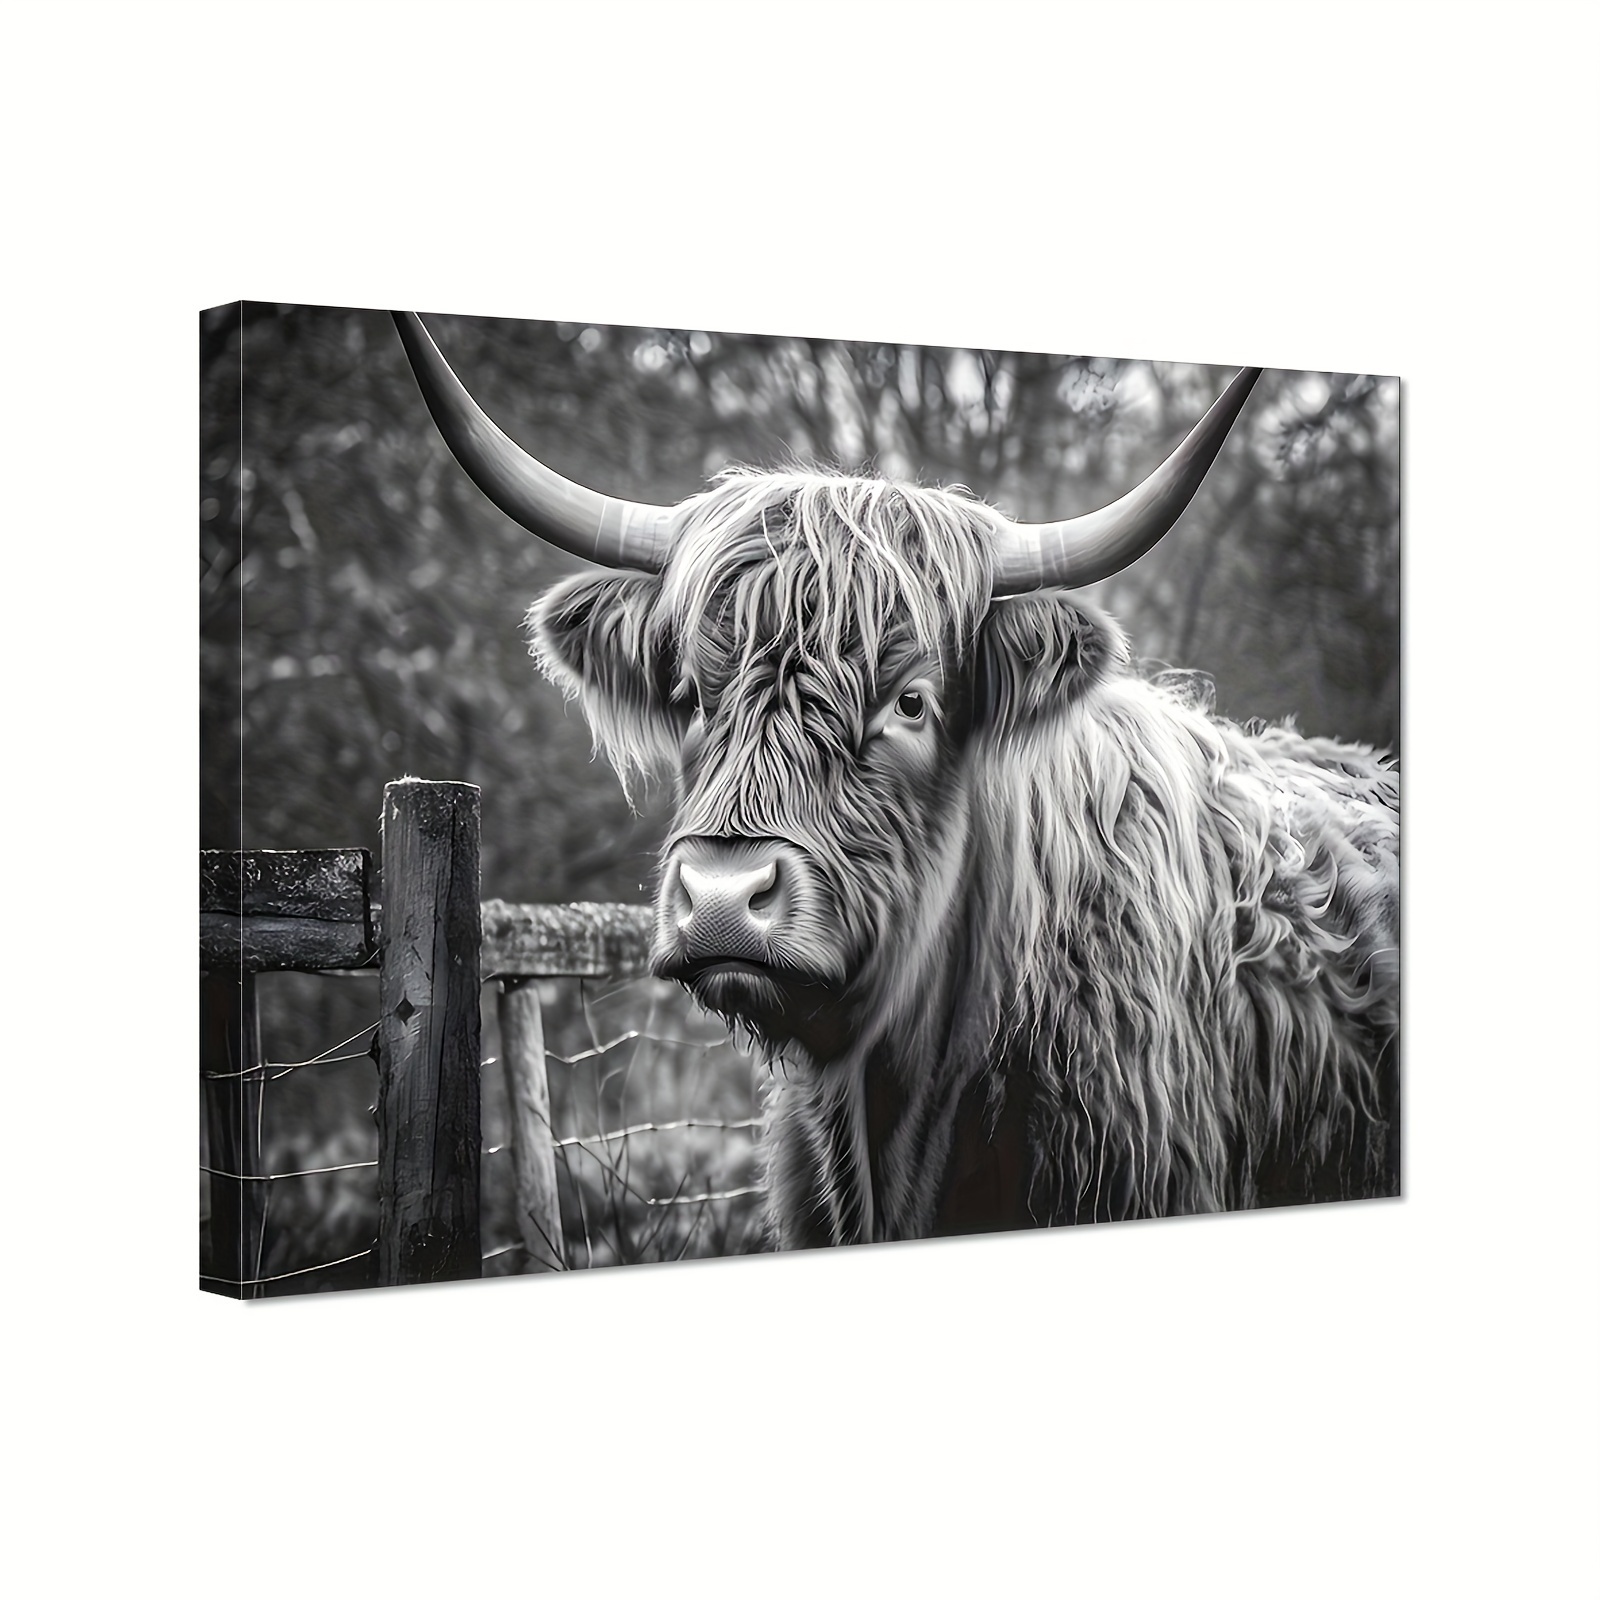 Highland Cow Canvas Wall Art Animal Print Pictures Highland Fluffy Cattle  Photo Framed Farmhouse Painting 20x20 inches for Home Decor…